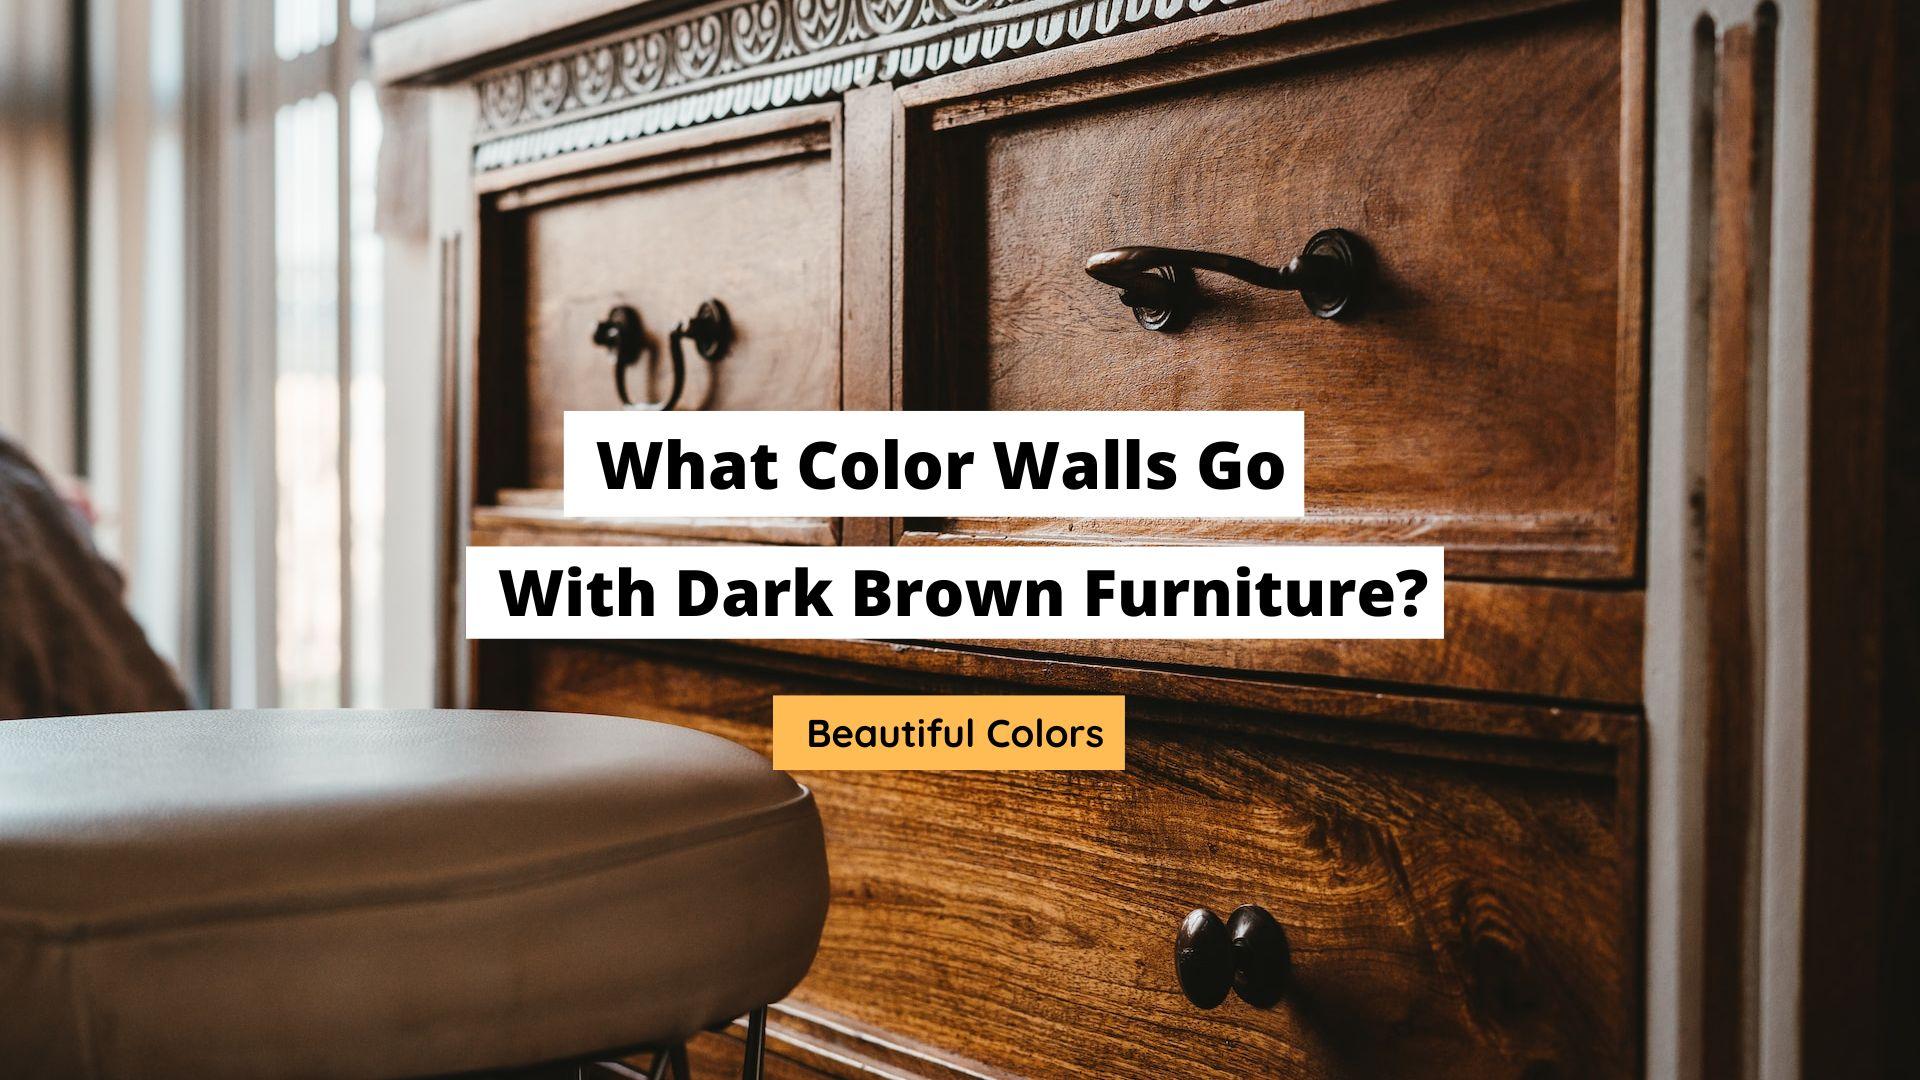 What Color Walls Go With Dark Brown Furniture